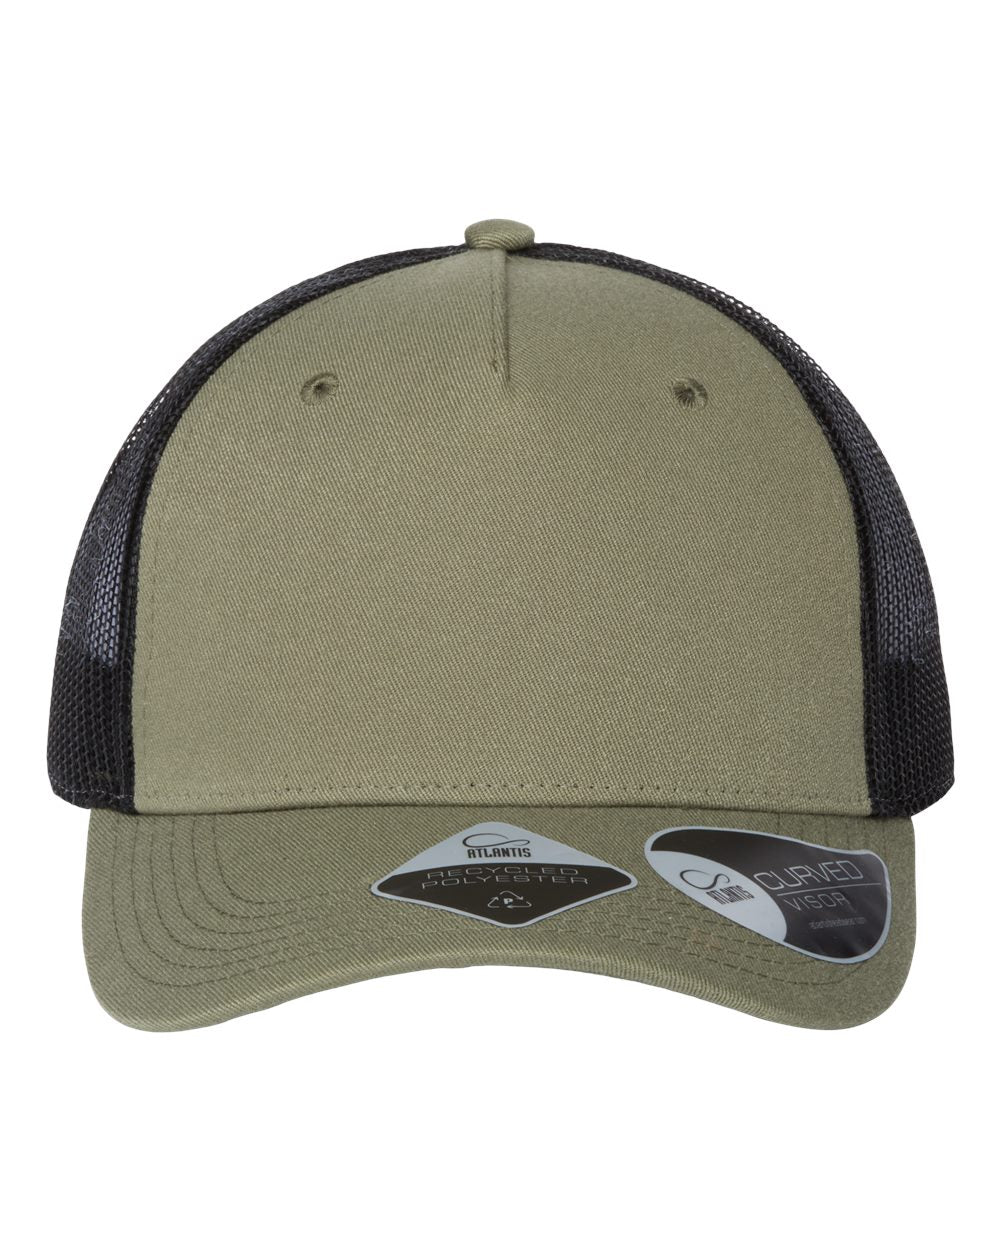 Customizable recycled polyester Atlantis truck hat in green